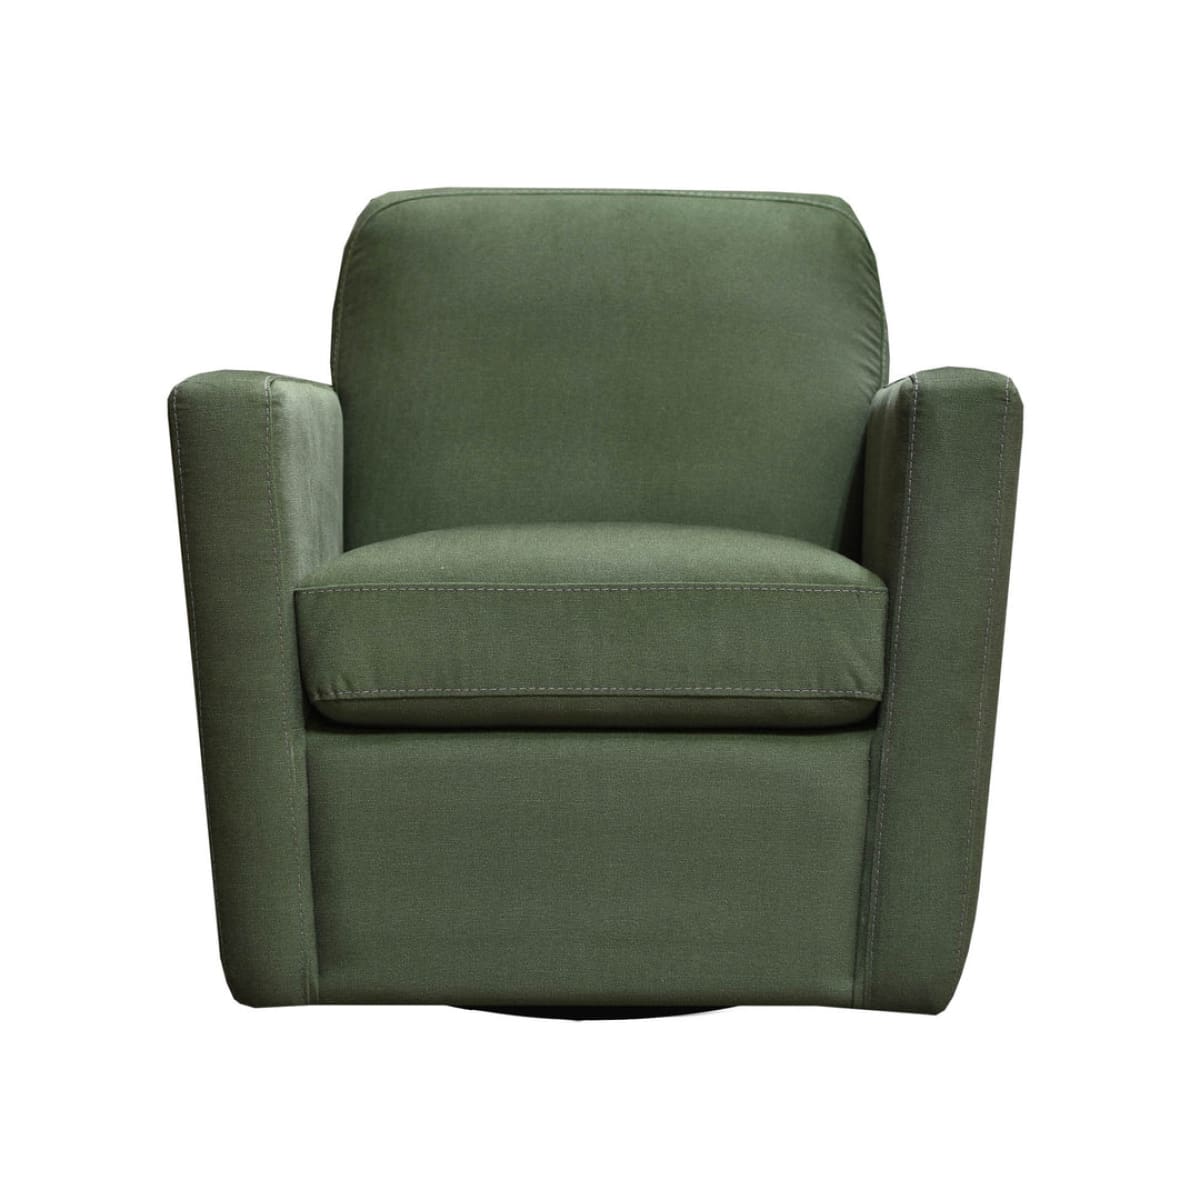 Cooper Swivel Club Chair - Forrest Green - lh-import-accent-club-chairs